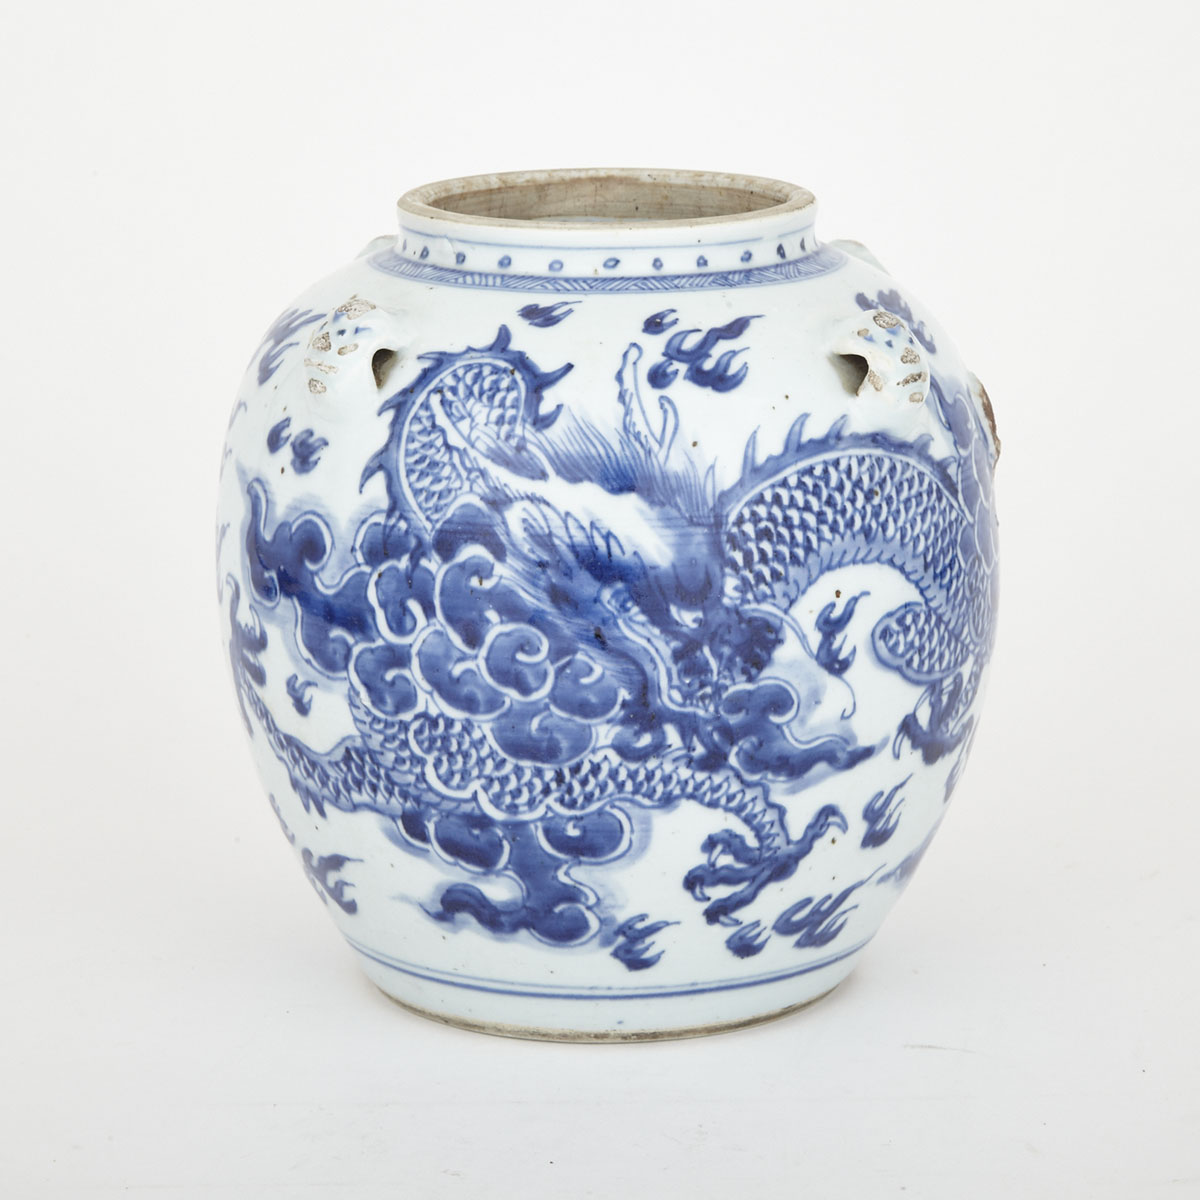 Kangxi Blue and White Dragon Jar, and of the Period